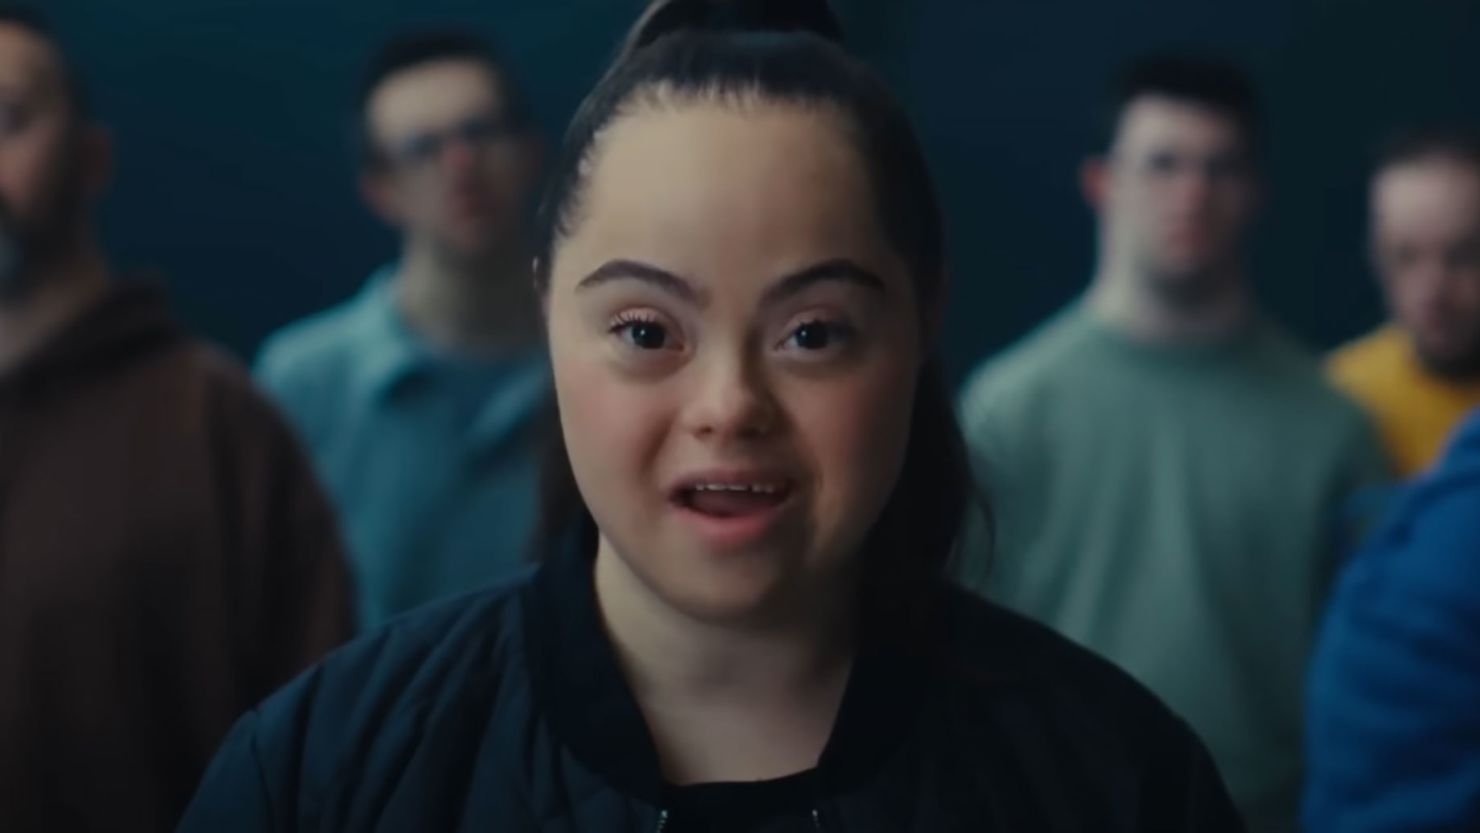 Actress Madison Tevlin in the "Assume That I Can" Down Syndrome awareness ad